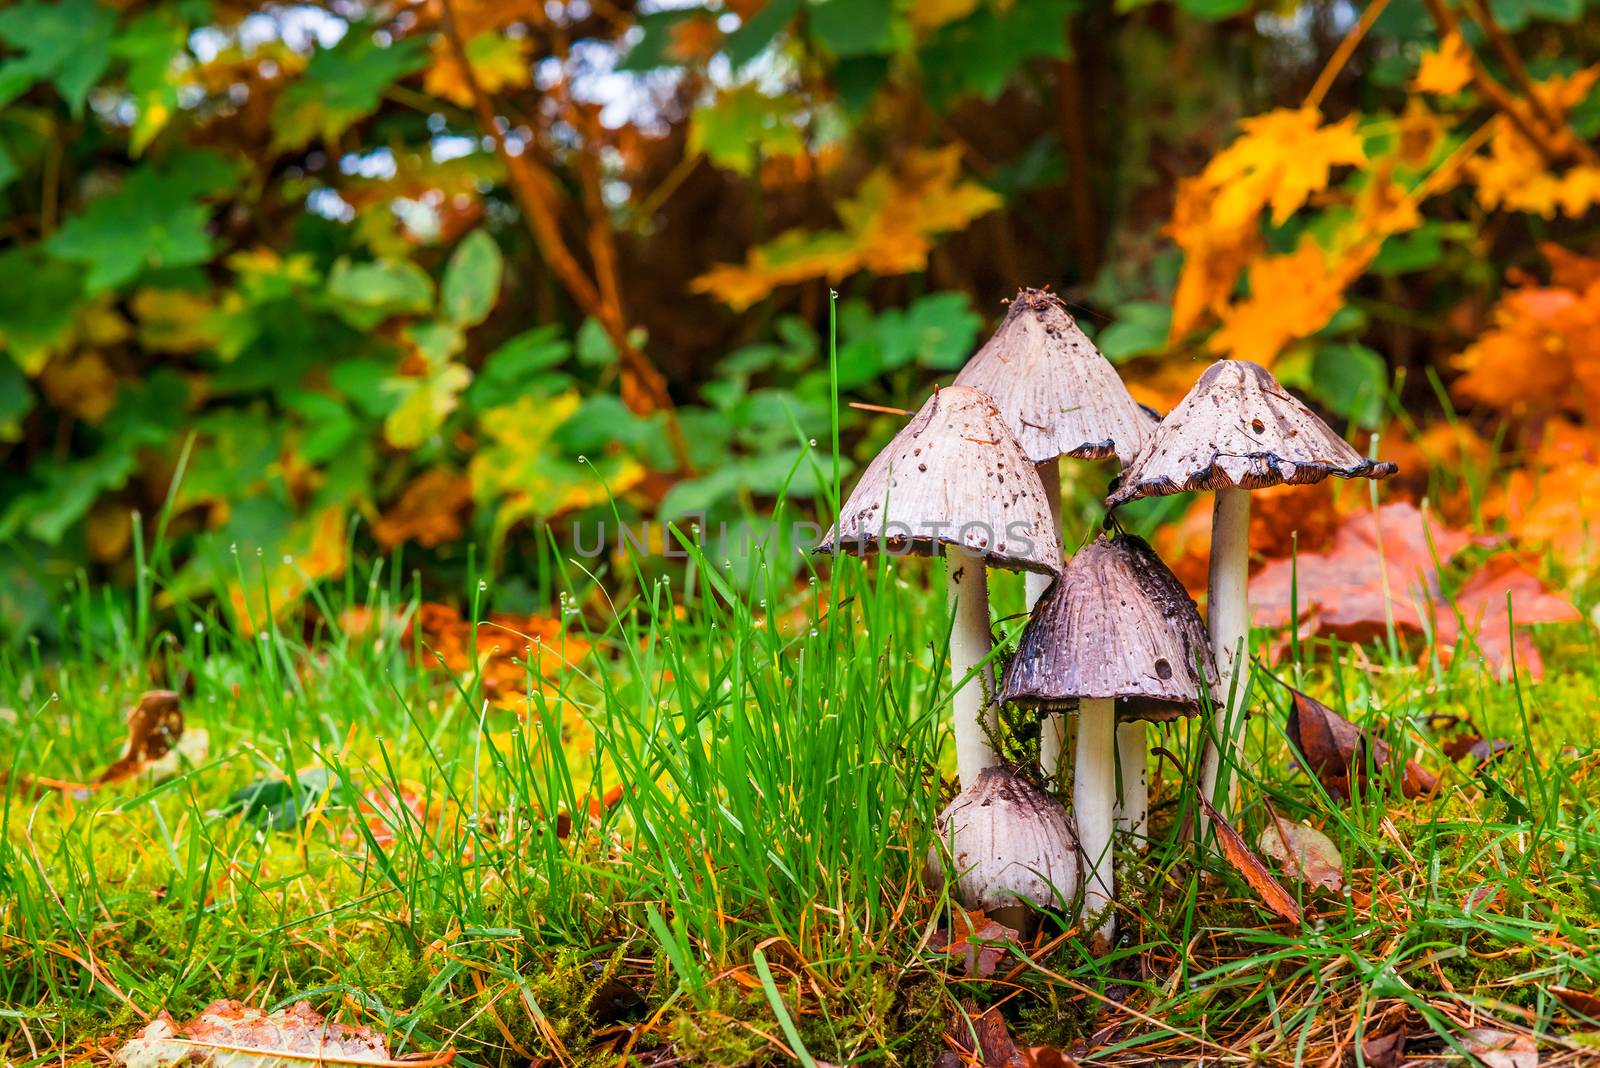 Mushrooms in the autumn forest by Sportactive